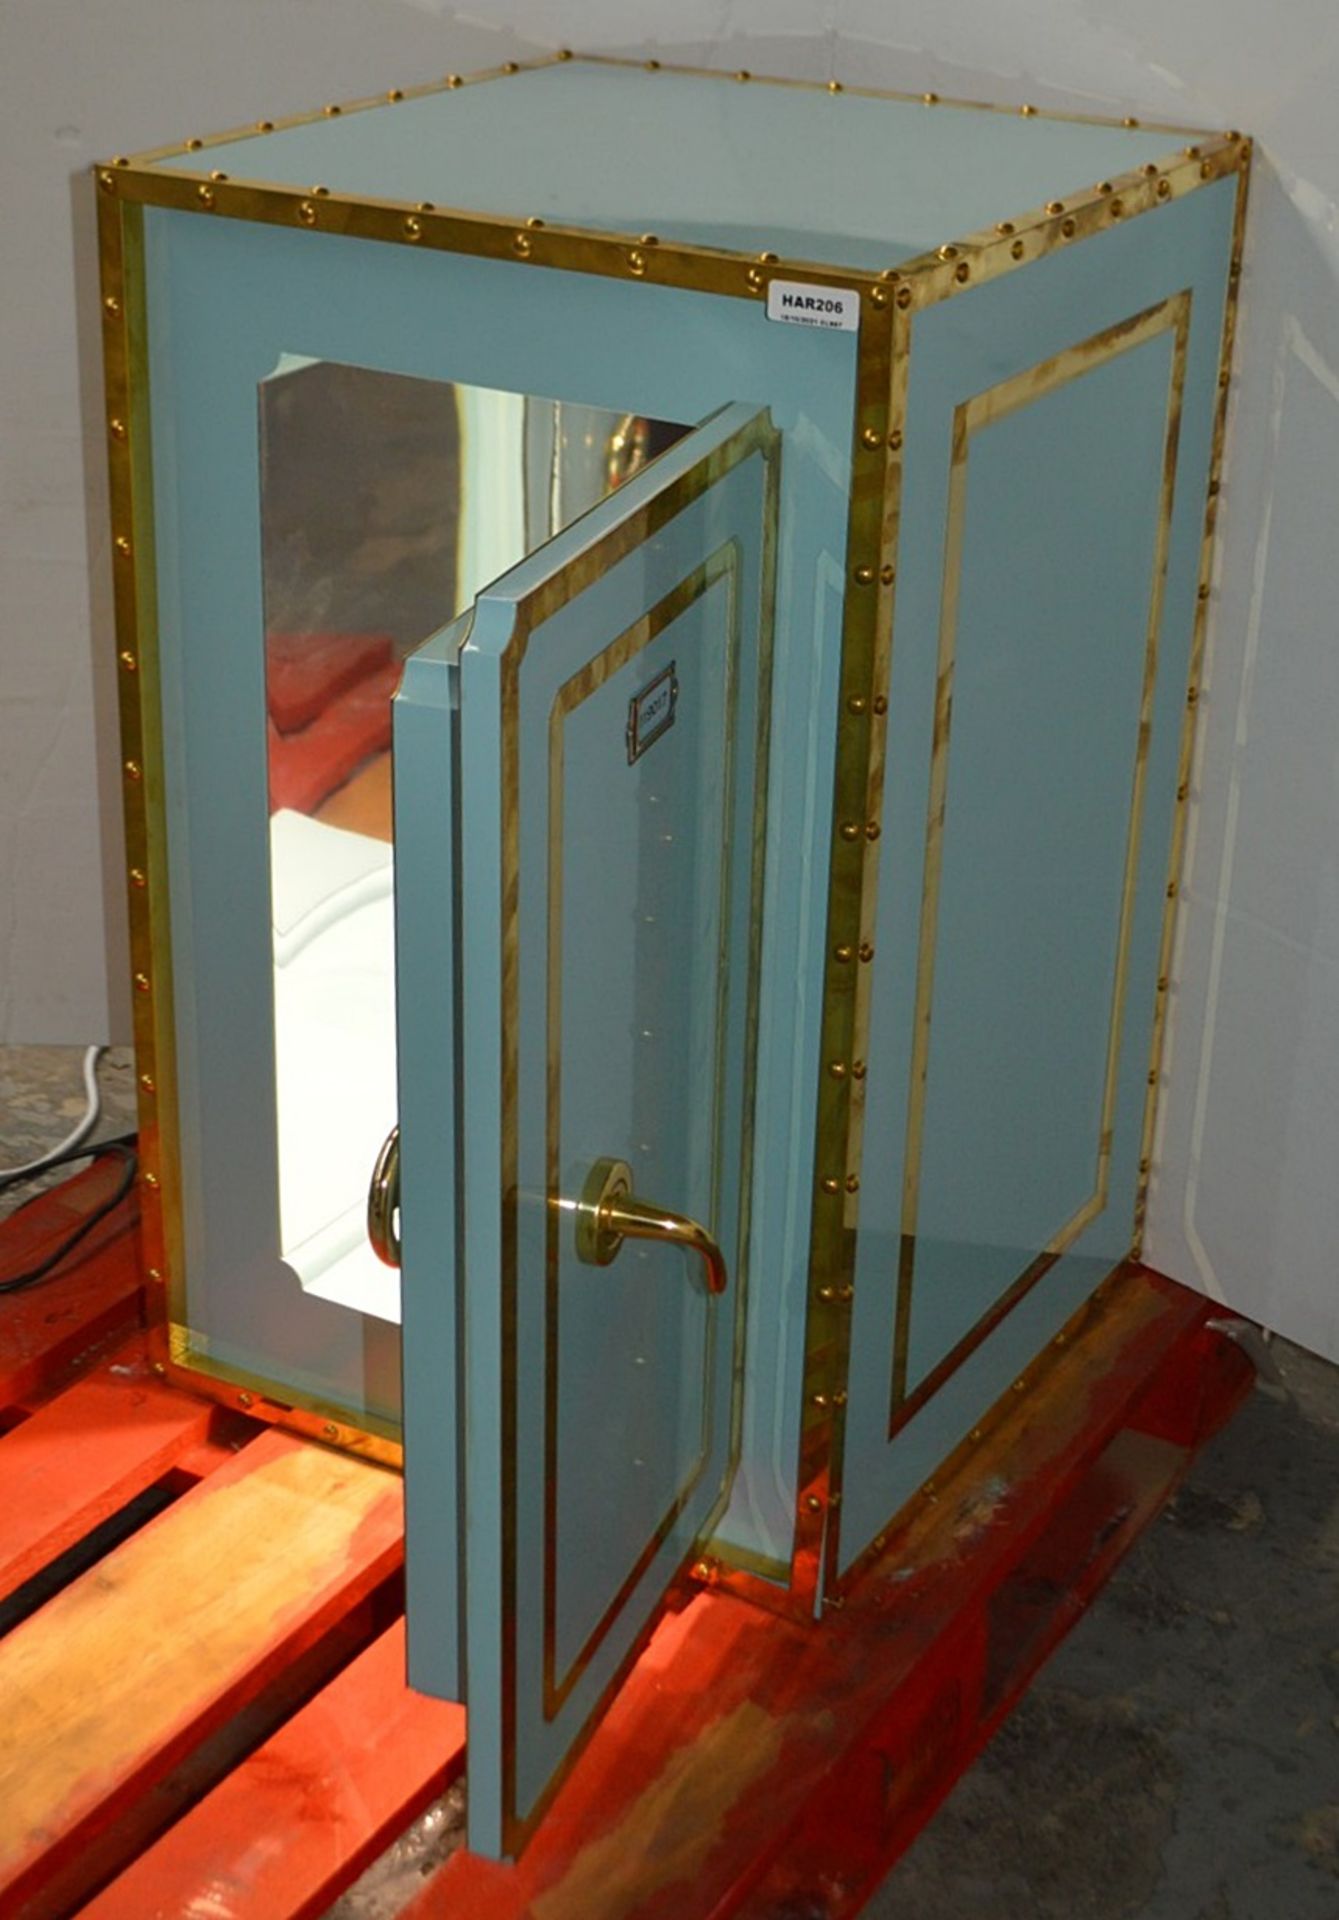 1 x Illuminated Bank Vault Safe-style Mirrored Retail Shop Display Box In Tiffany Blue - Dimensions: - Image 4 of 6